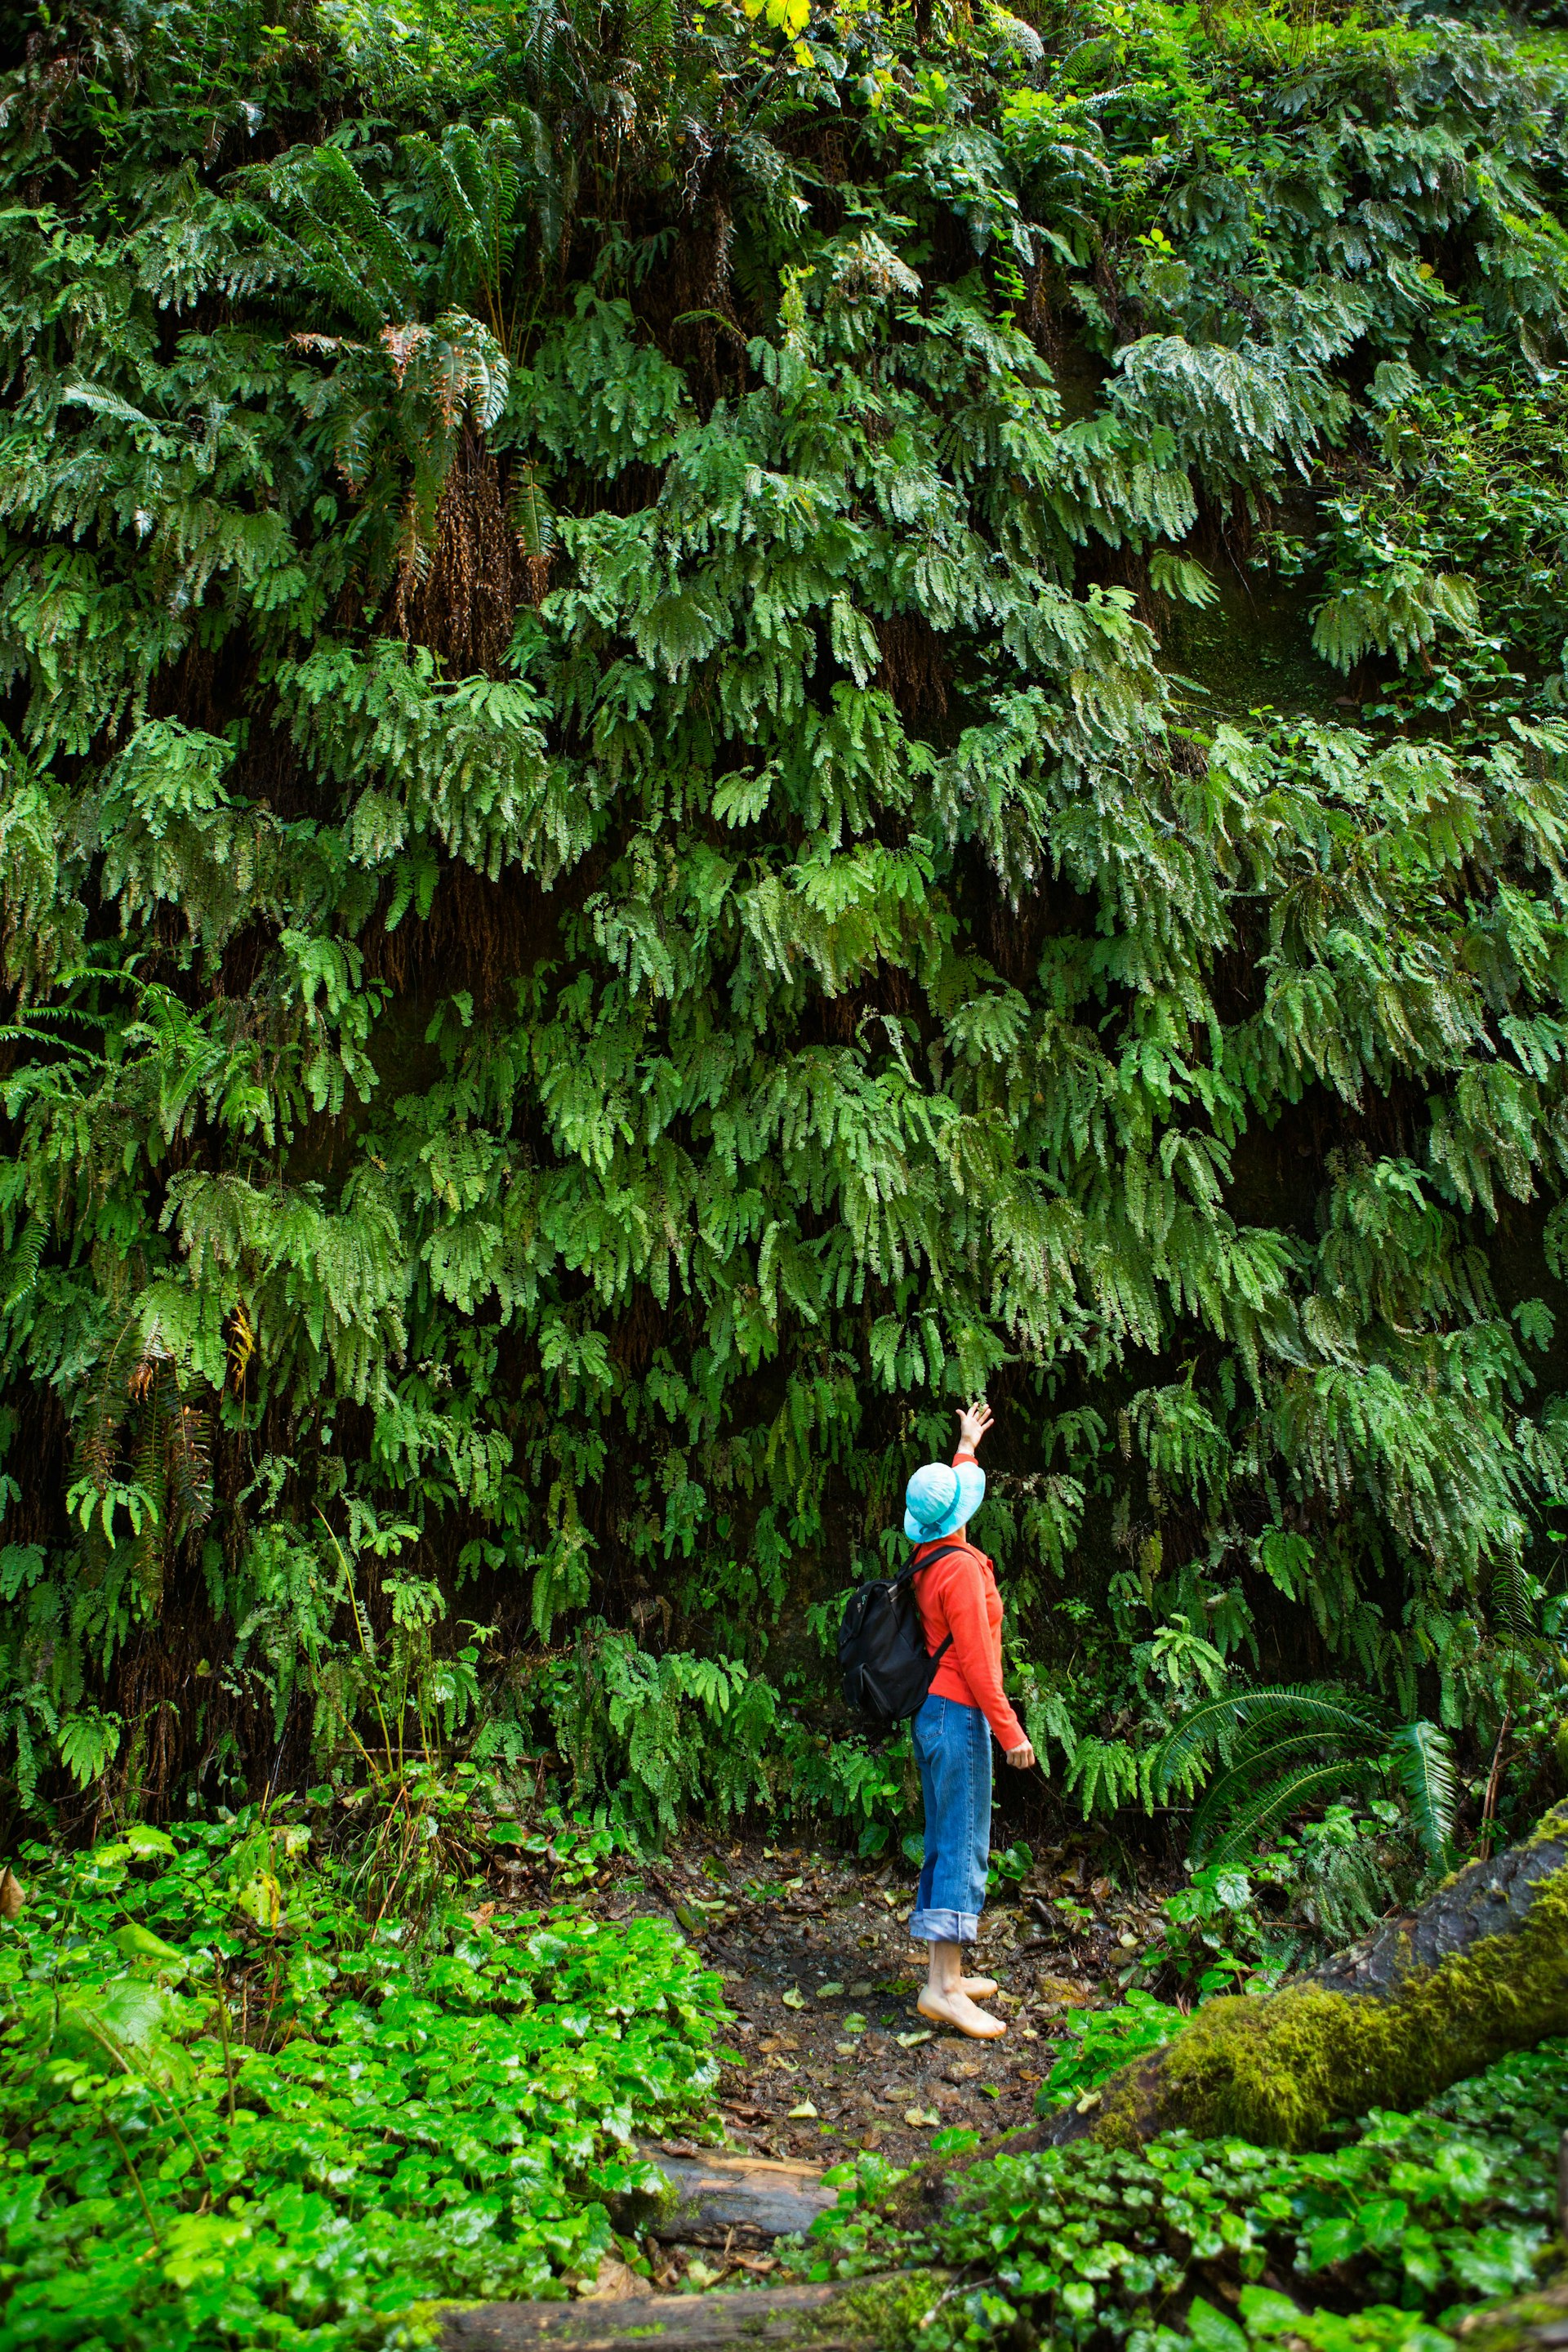 Tourist touching the ferns in Fern Canyon, Redwoods State Park 